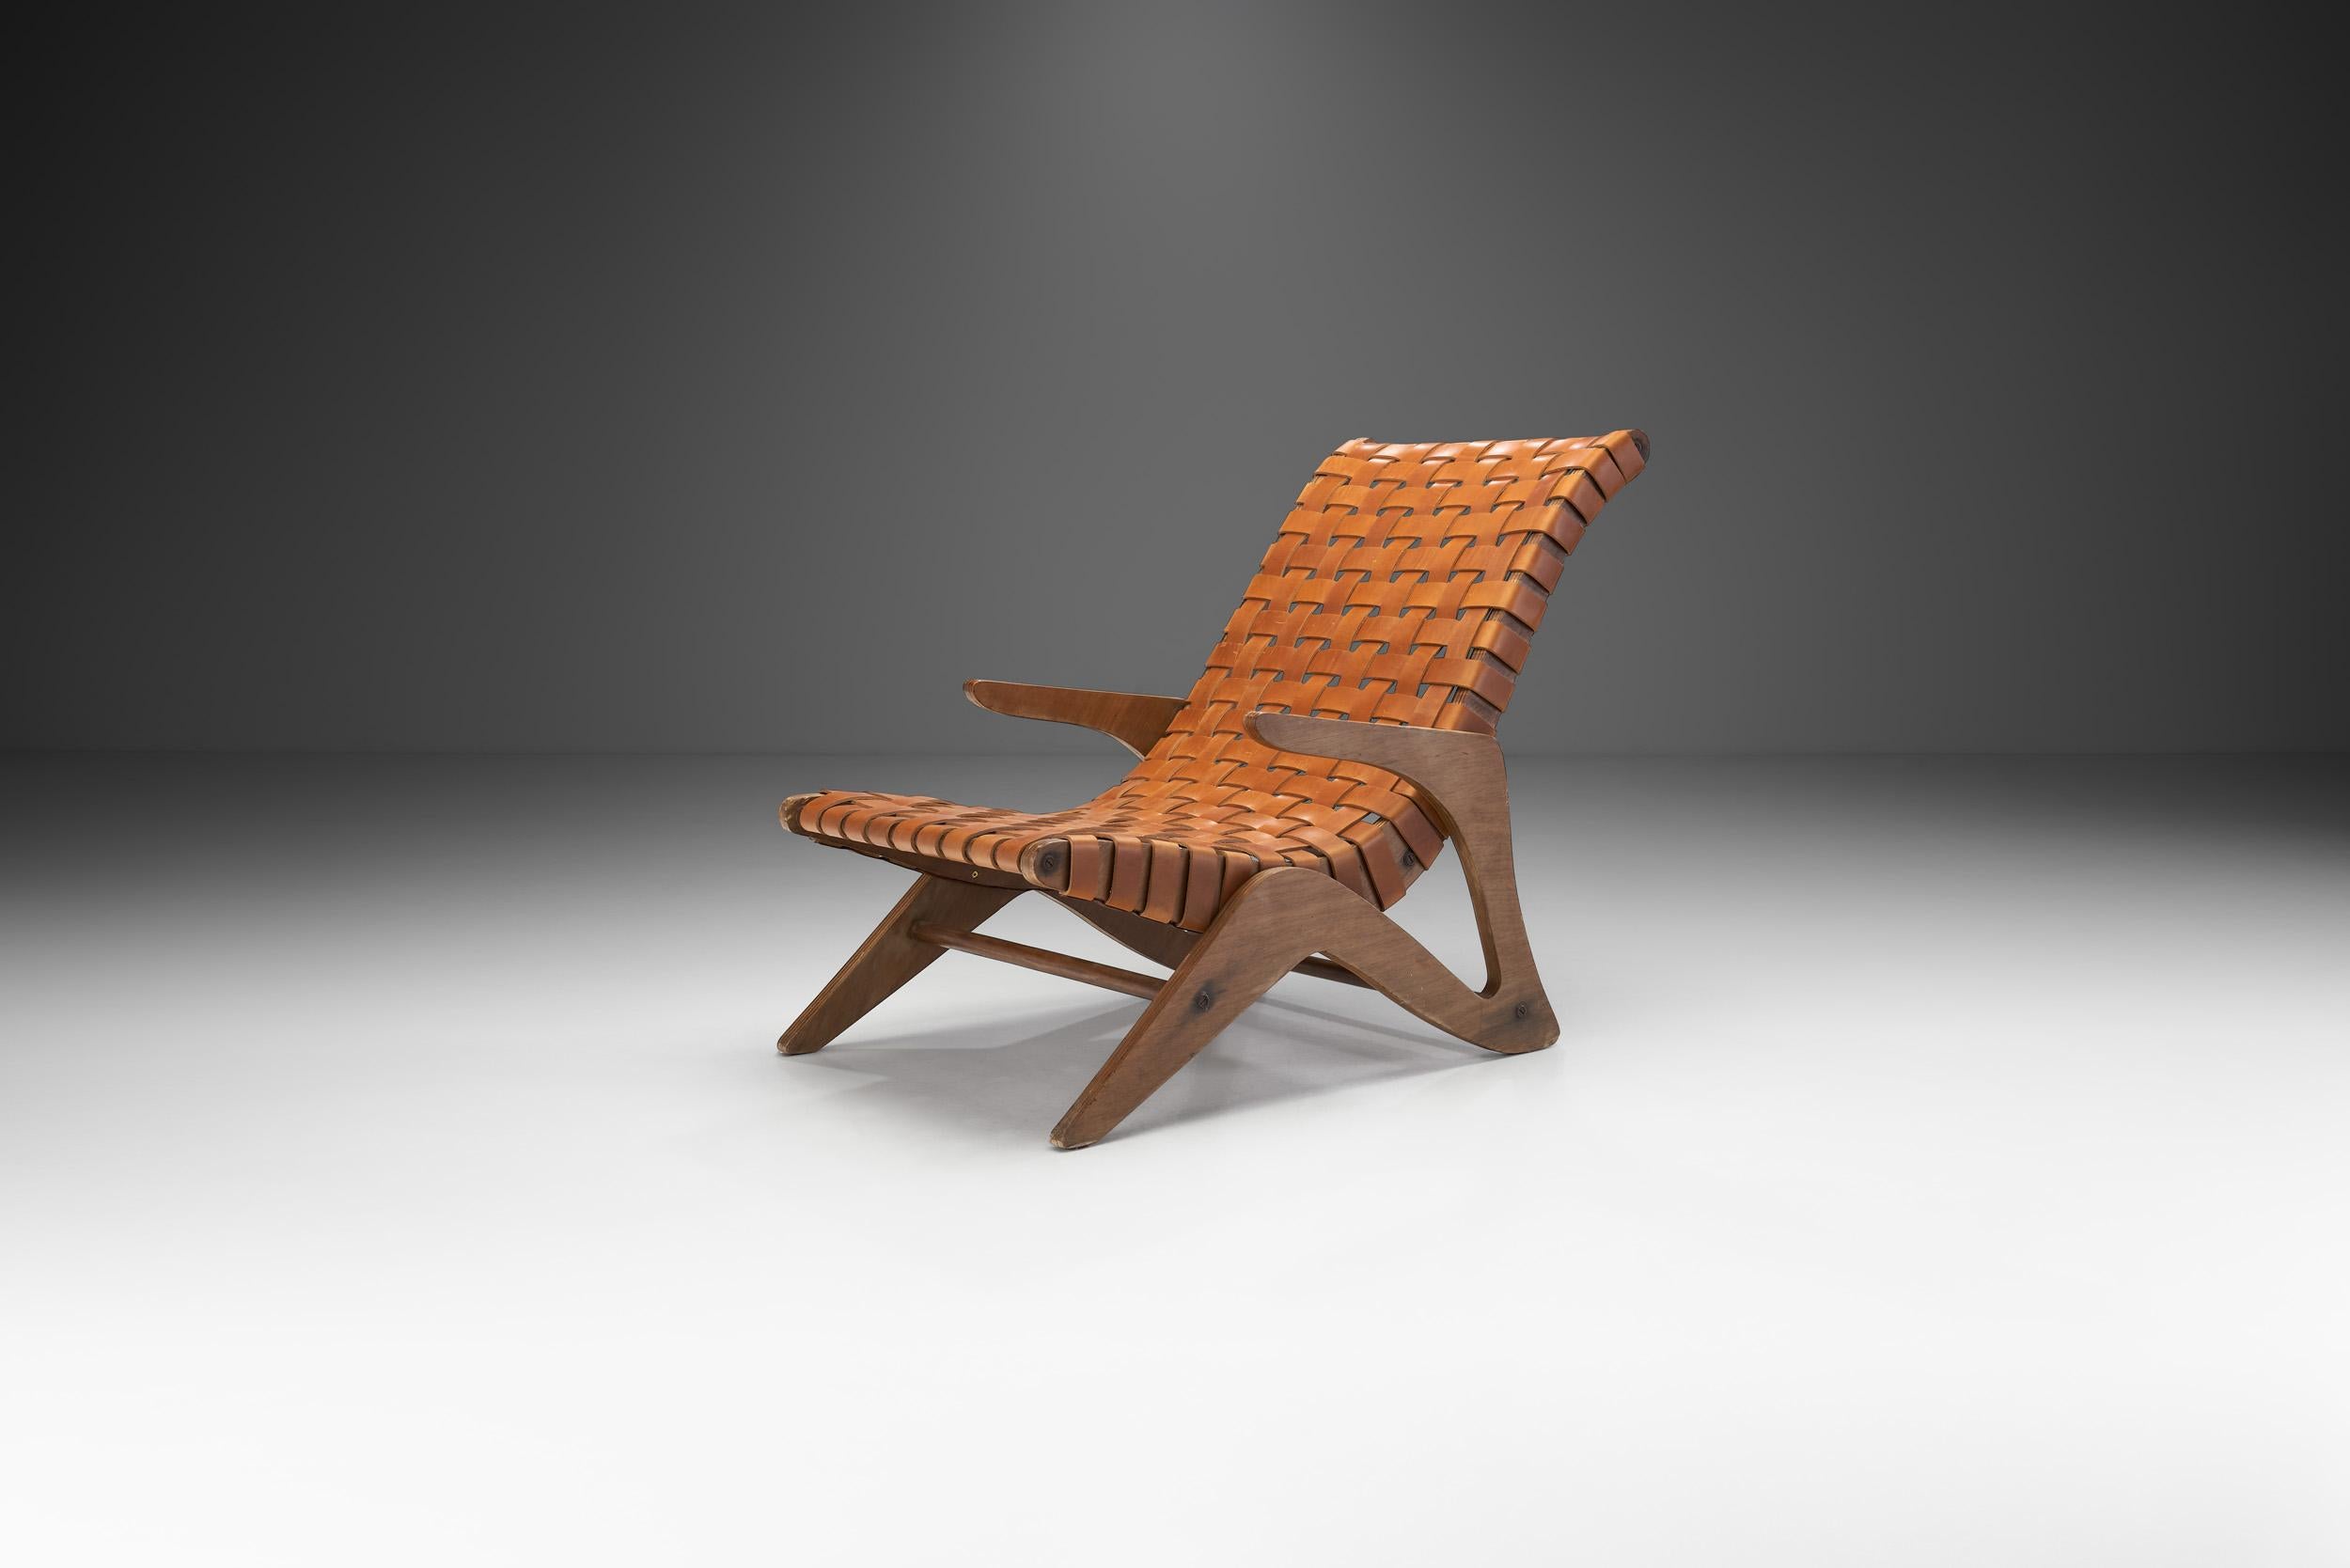 This beloved José Zanine Caldas lounge chair from the “Linha Z” or “Z Line” is an exceptional example of Brazilian design of the 1950s. The design dates to 1949, The woven leather straps and the organic shape is unmatched.

This chair model is made